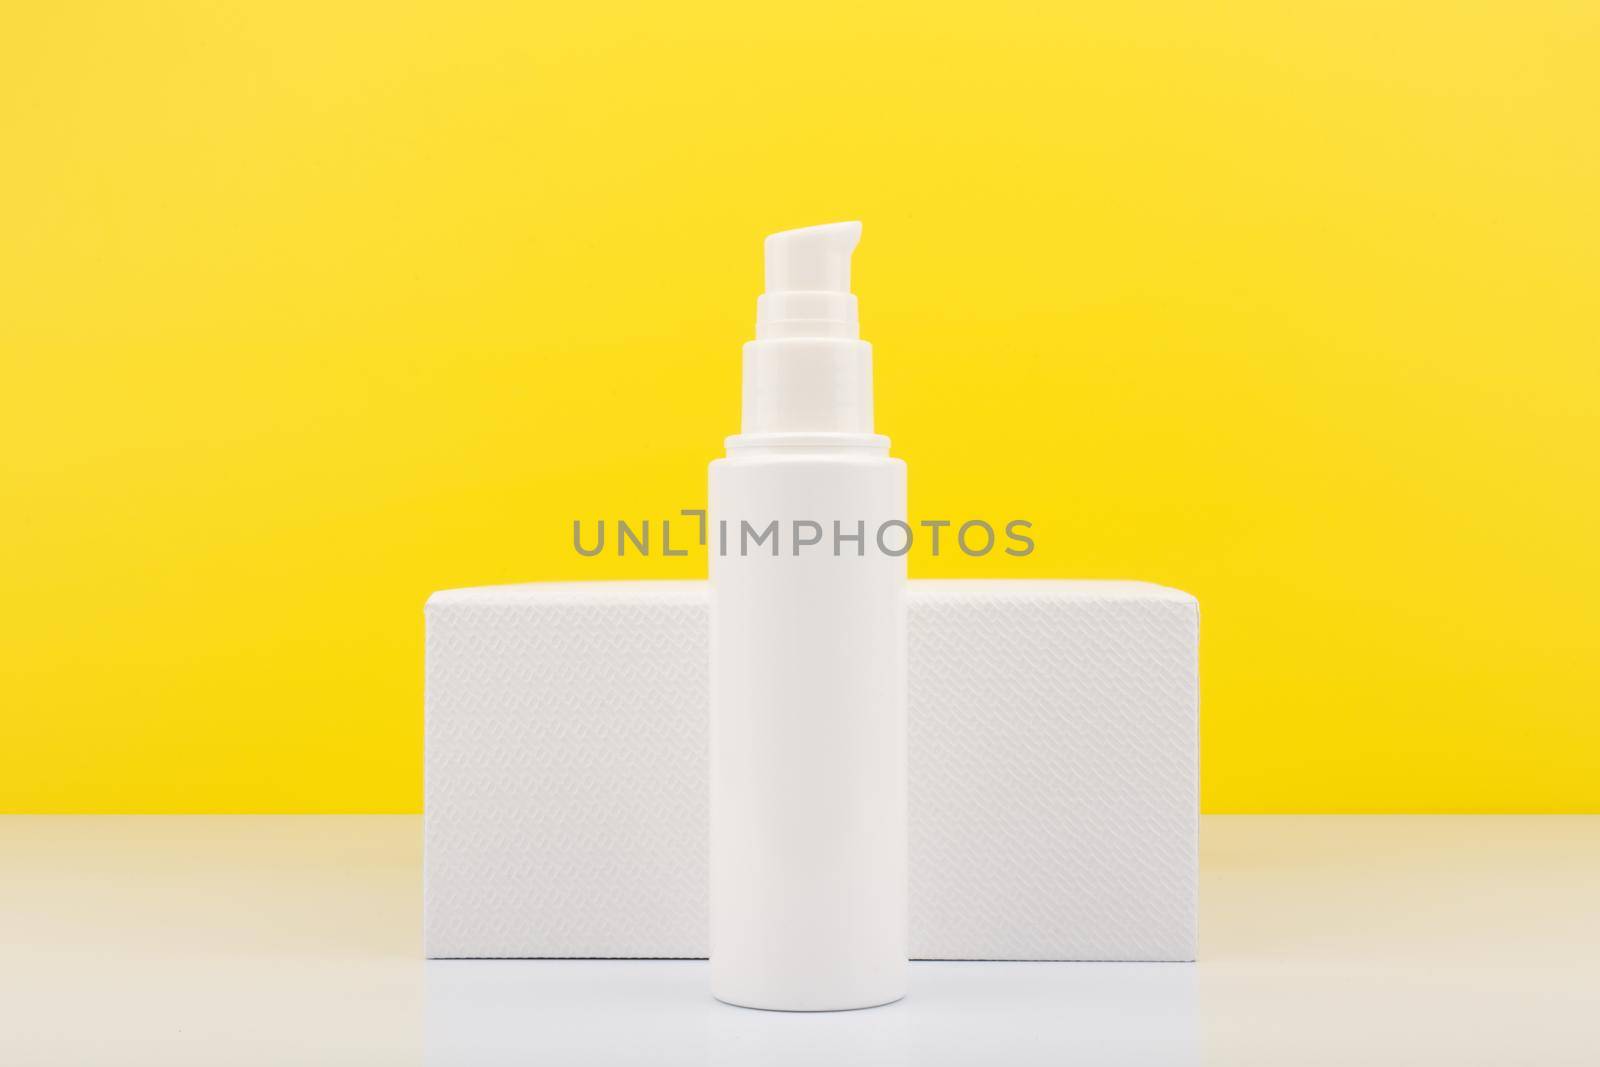 Face cream, lotion or gel for skin care against white geometric podium and bright yellow background with copy space by Senorina_Irina